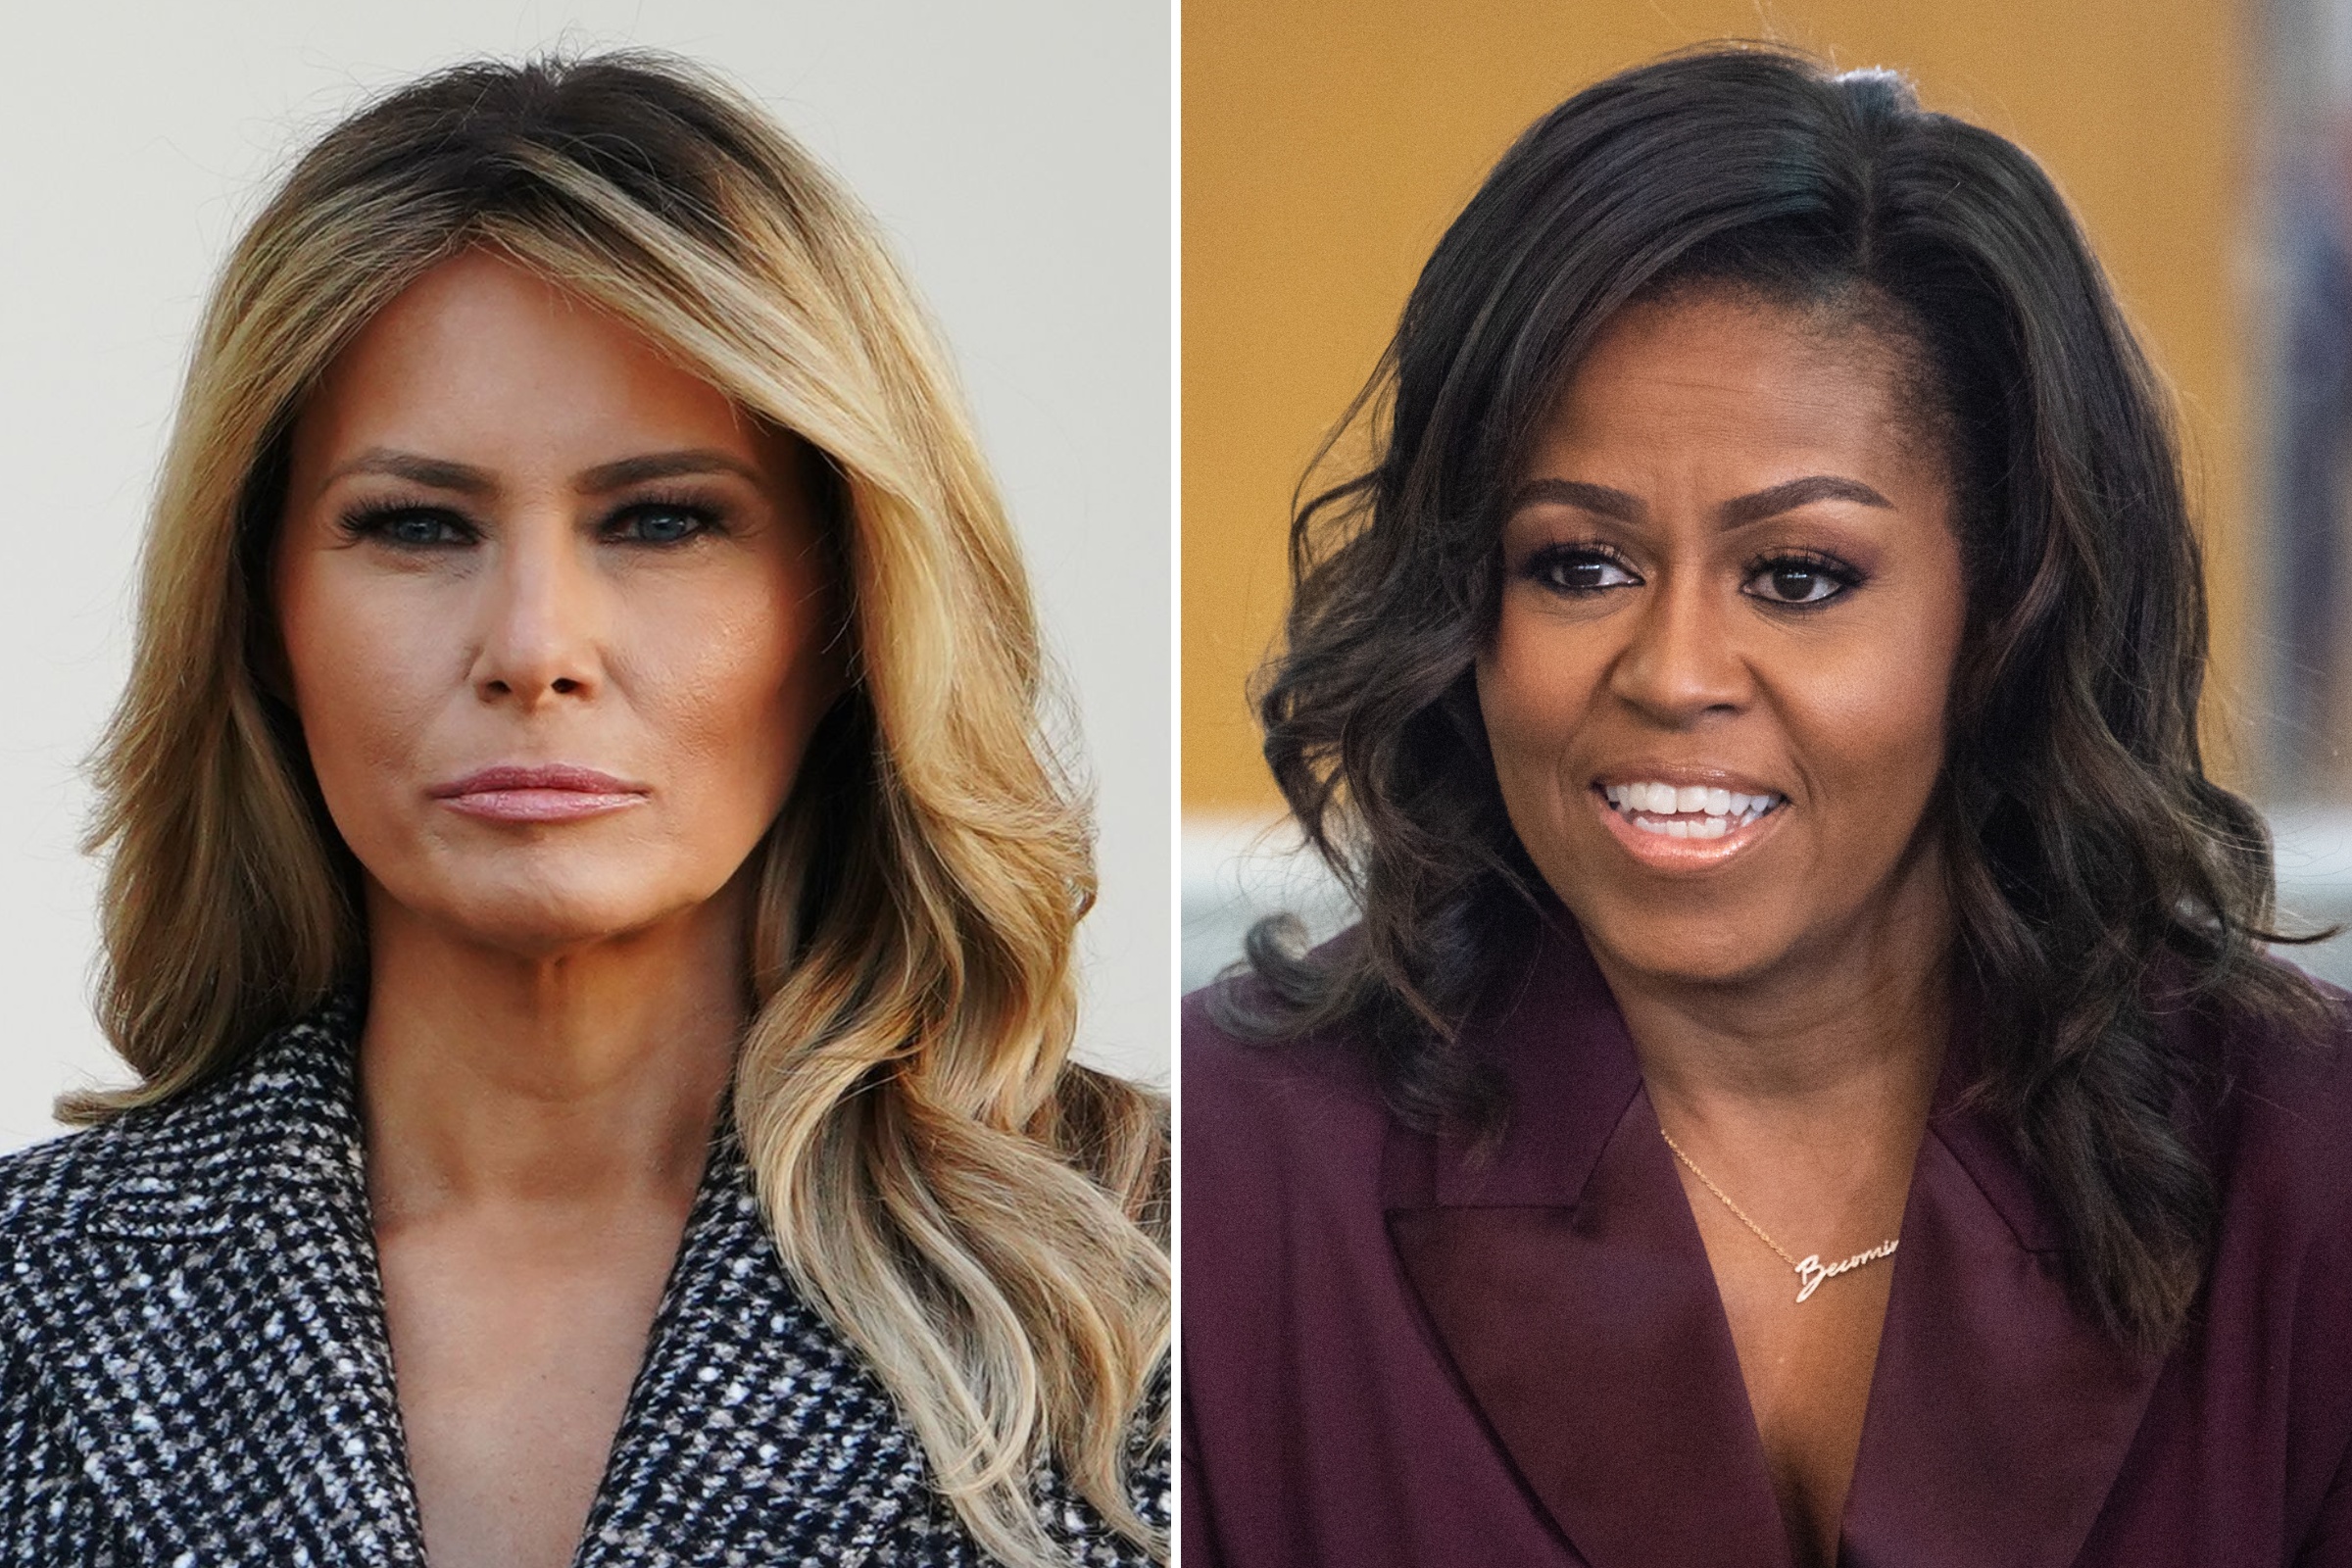 Michelle Obama Accused of Being 'Jealous' of Melania Trump - Newsweek